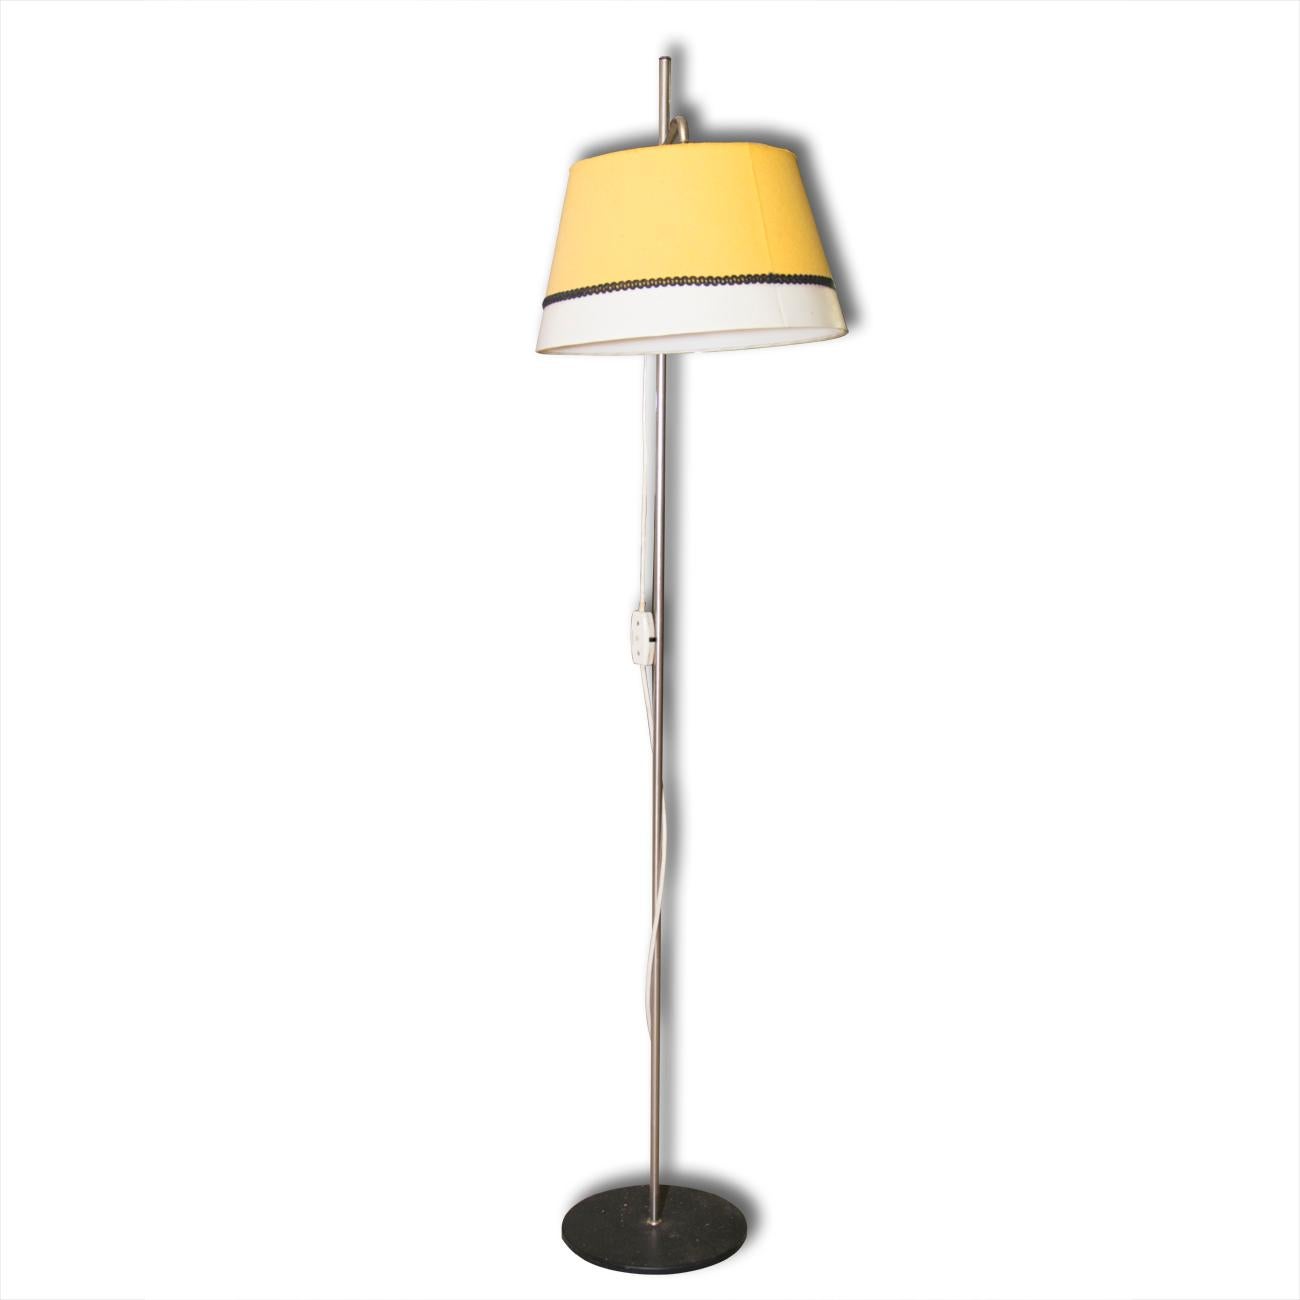 Midcentury vintage metal floor lamp, it was made in Czechoslovakia in the 1960s. he lamp features the slender leg, chrome-plated construction and a fabric shade. This lamp is fitted with one bulb E27 and has an original wiring.

 